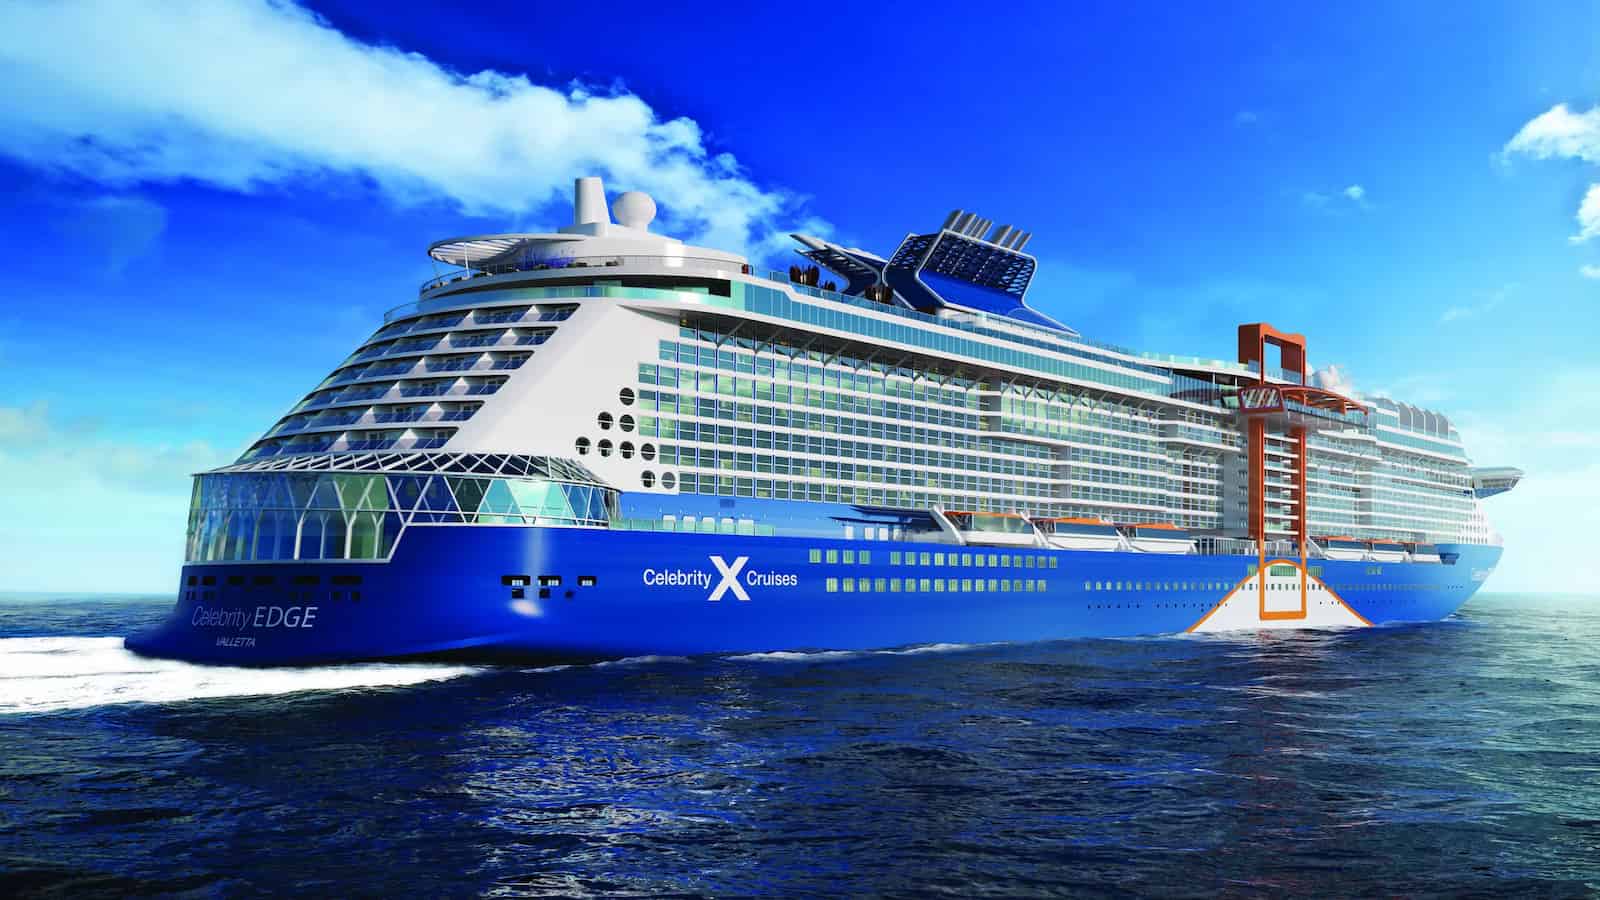 Celebrity Cruises: Ownership, Impact and Future Plans